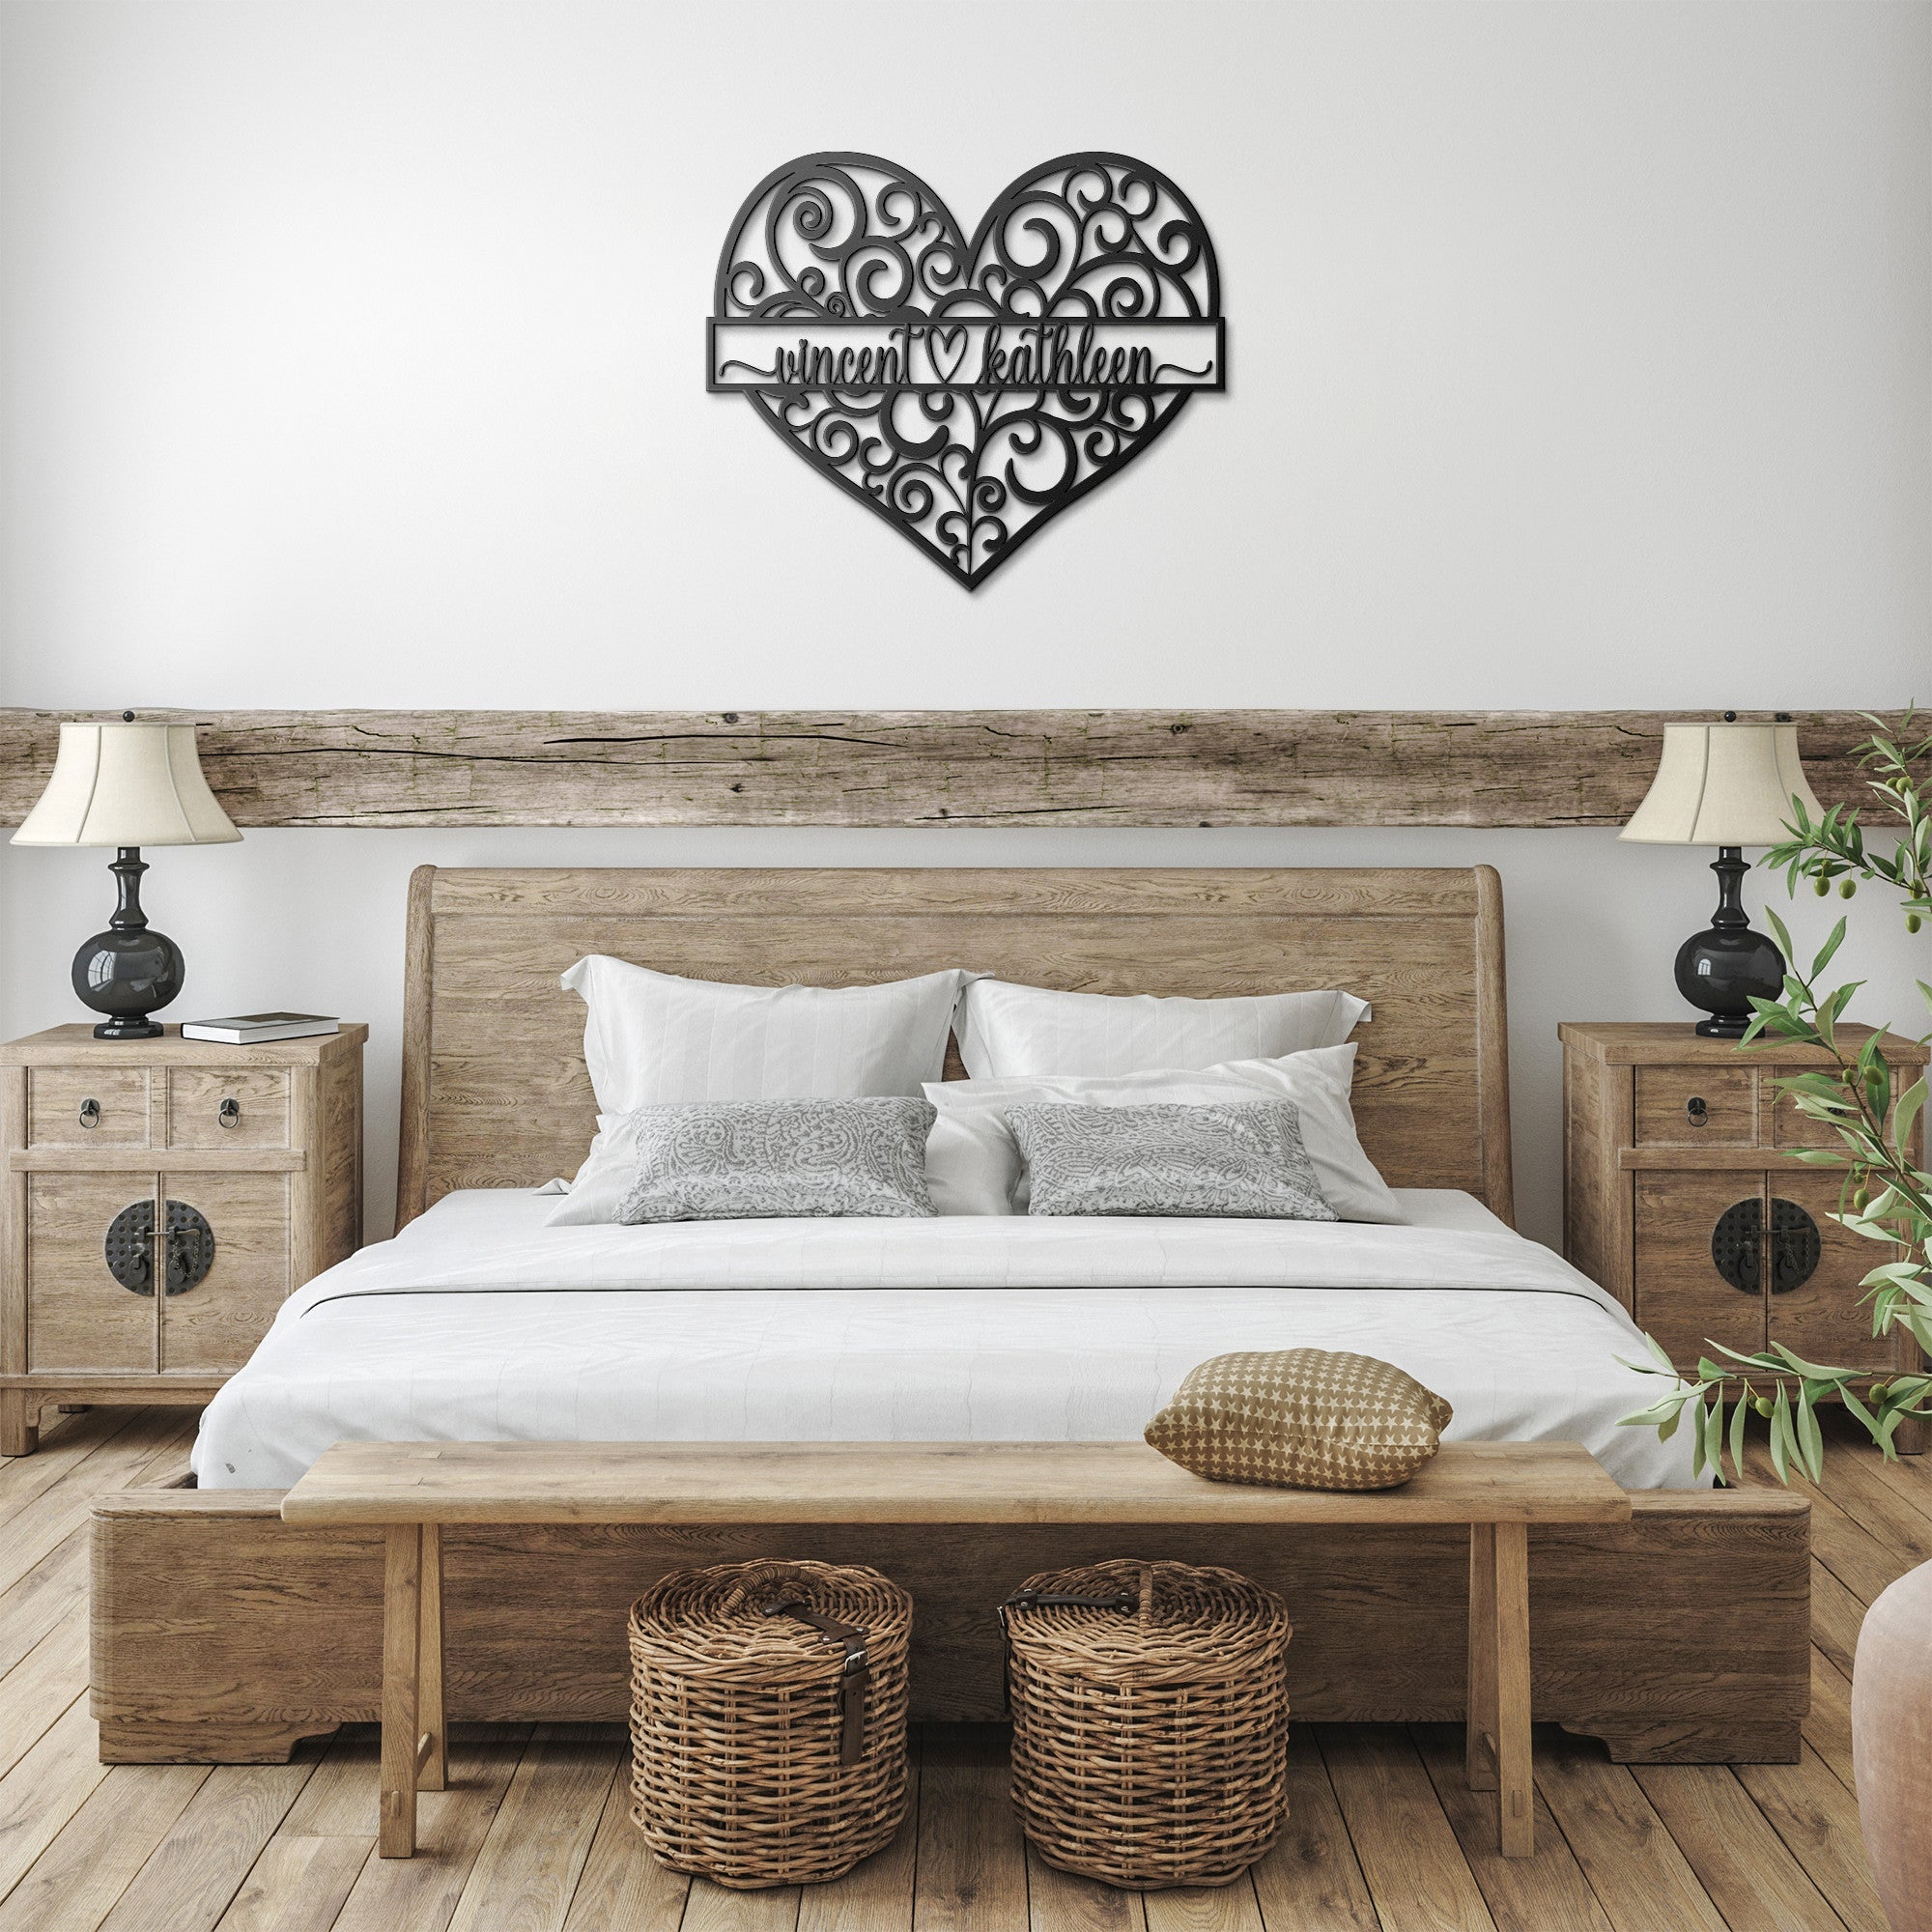 Personalized Swirl Heart Sign - Cool Metal Signs